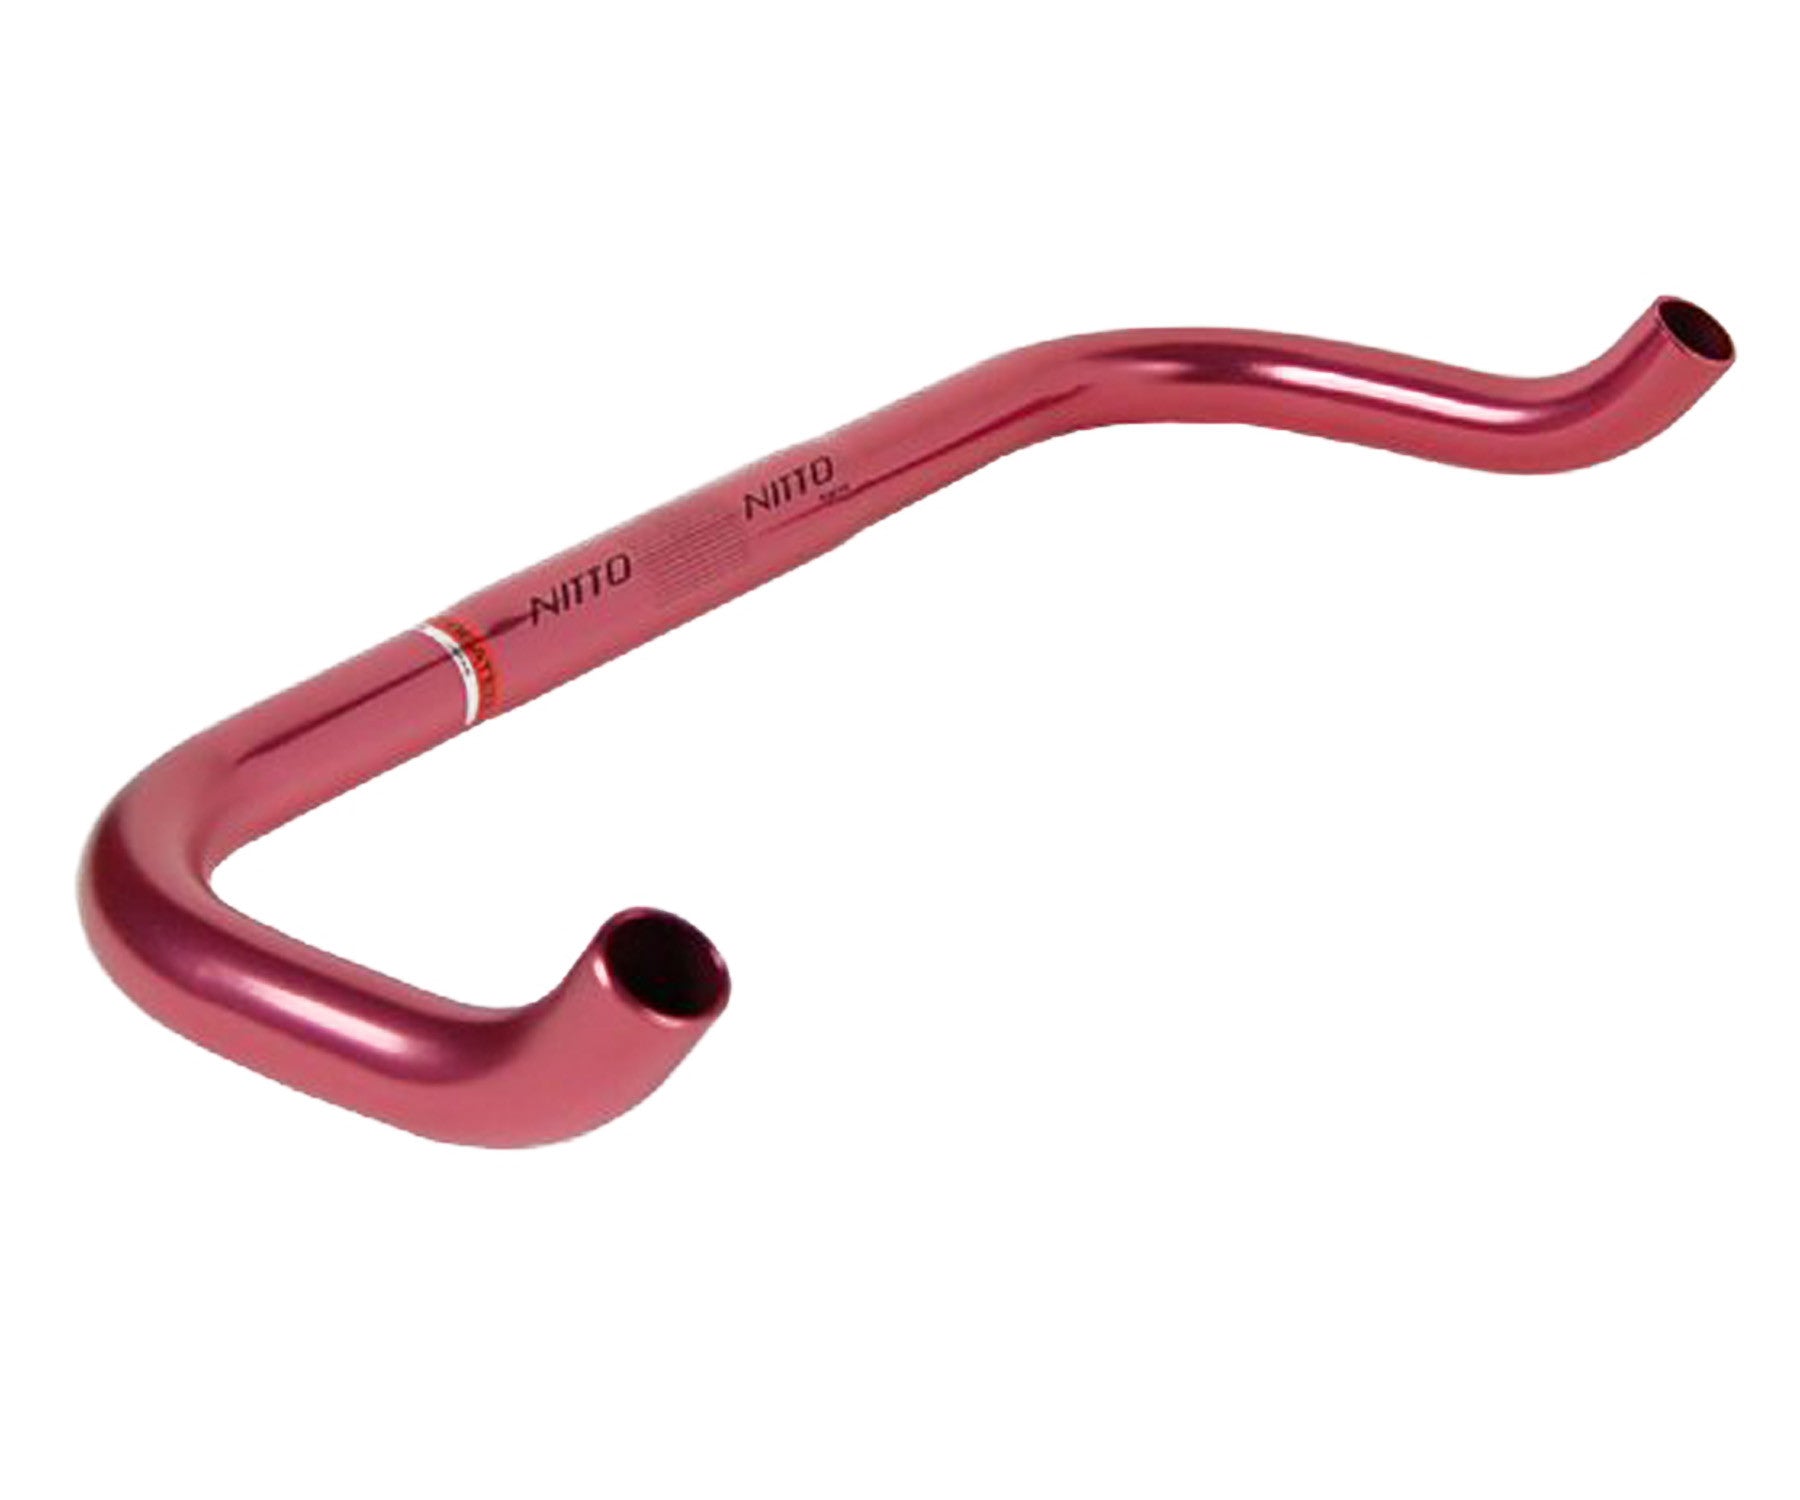 Nitto RB-018 handlebar - anodized colors - Retrogression Fixed Gear